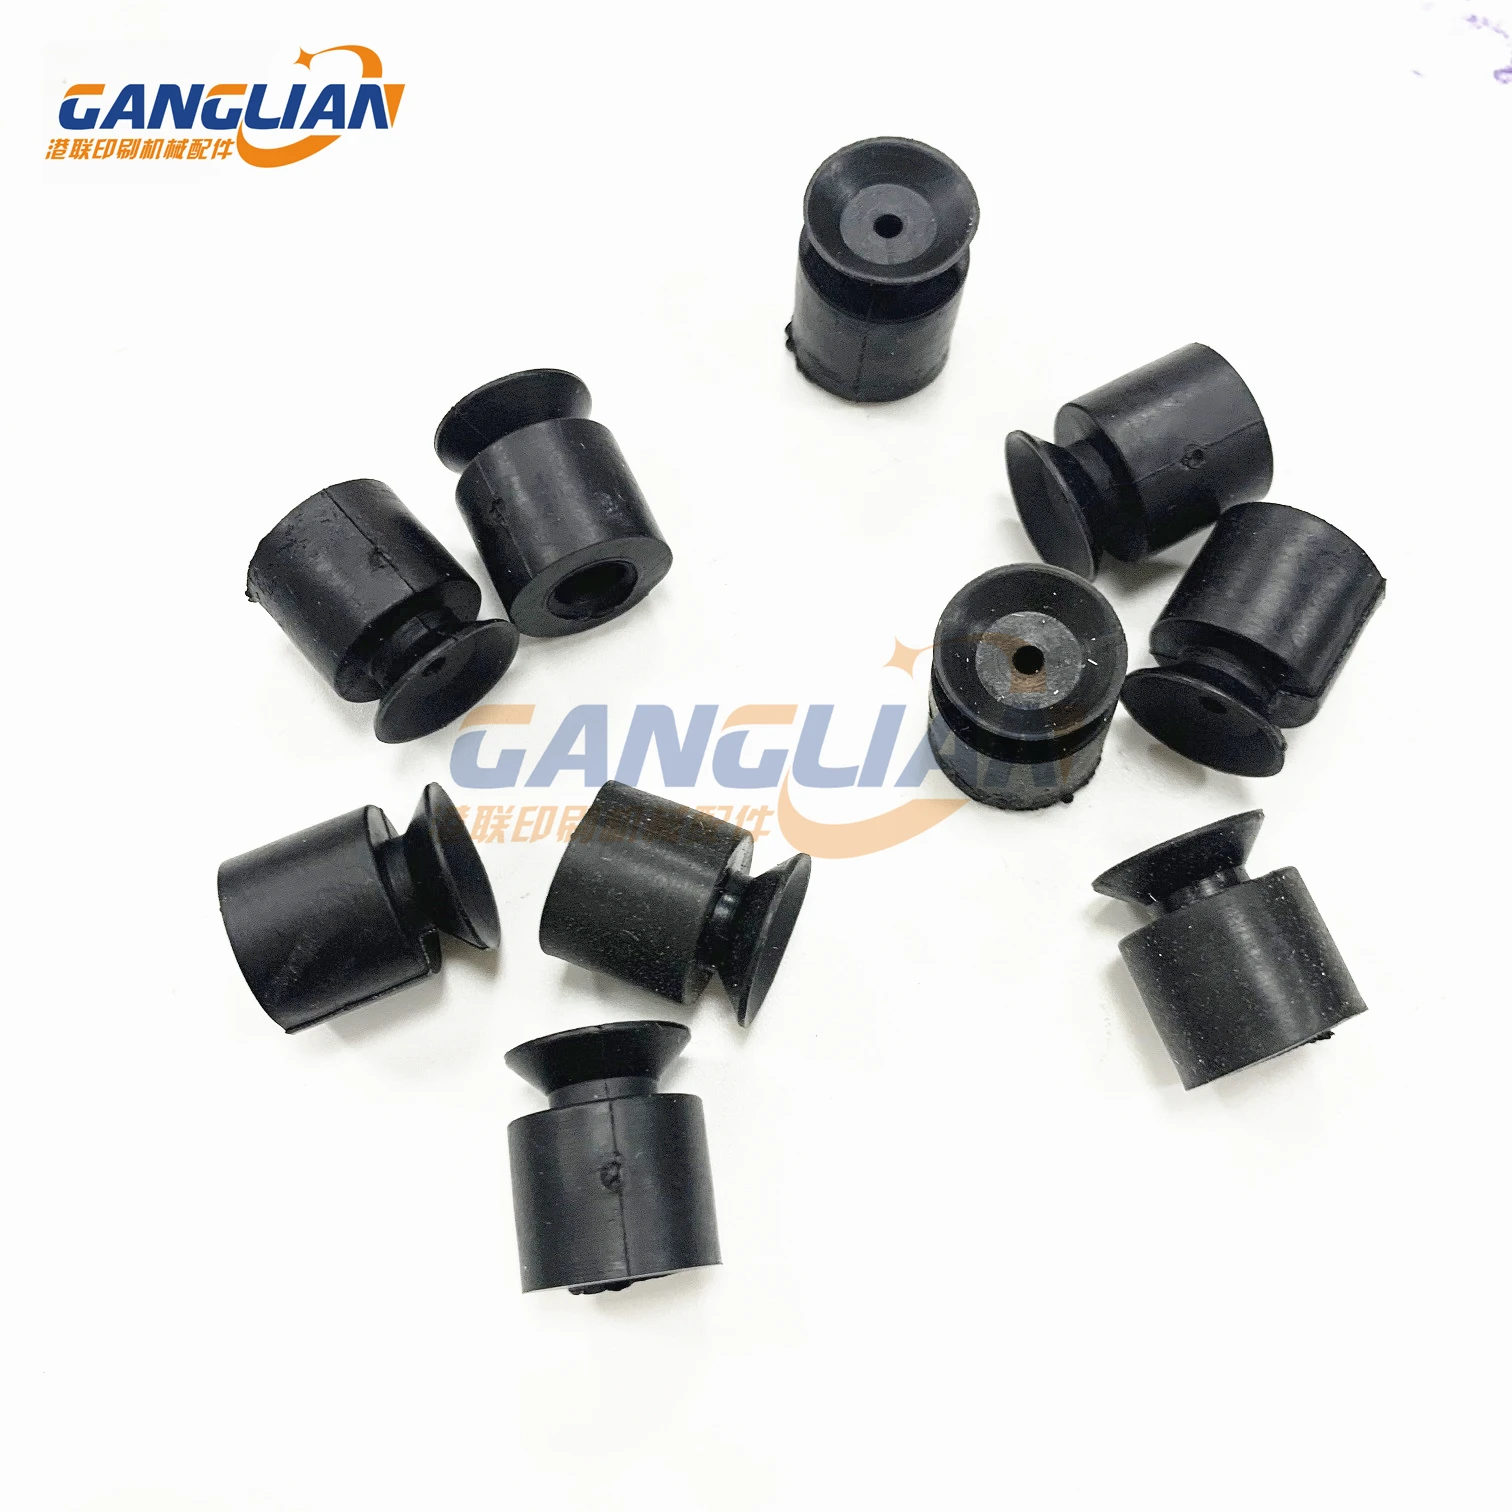 100 Pieces Muller Martini Rubber Sucker Nozzle Suction Cup Stitching Press Binging Parts Offset Printing Machine